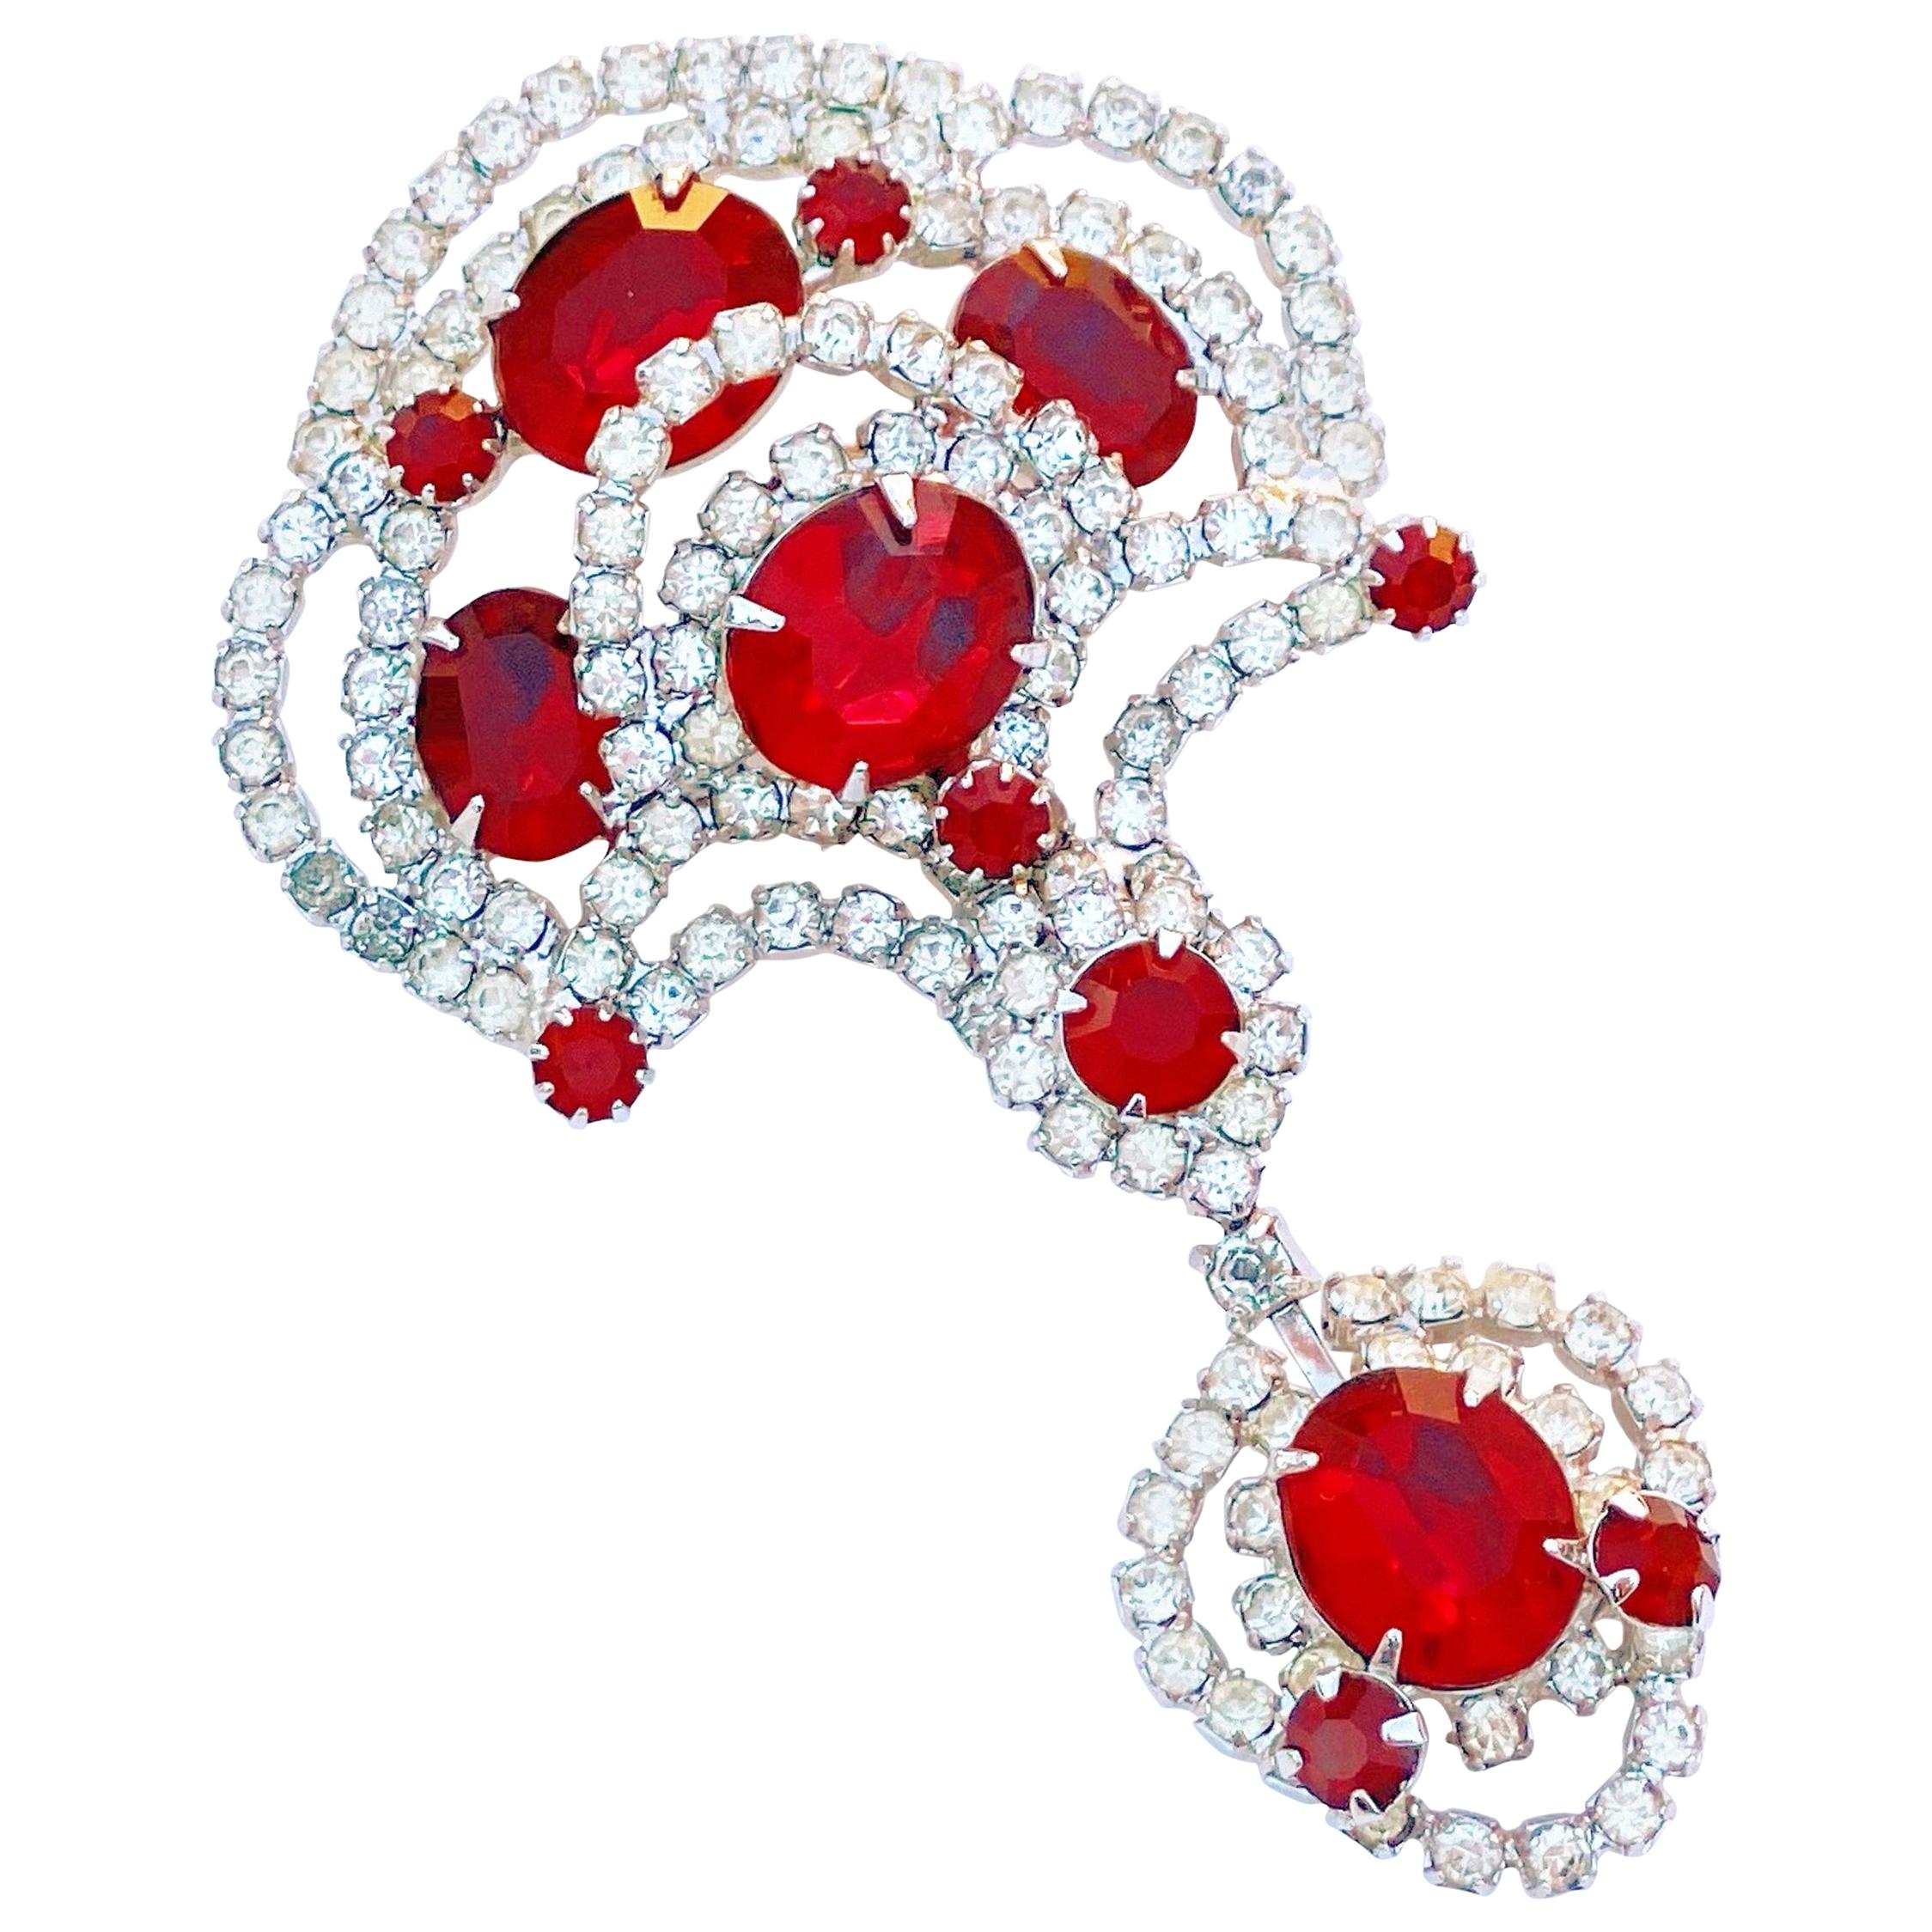 Vintage Rhodium Plated Ruby Red Crystal Brooch By Kramer, 1940s For Sale